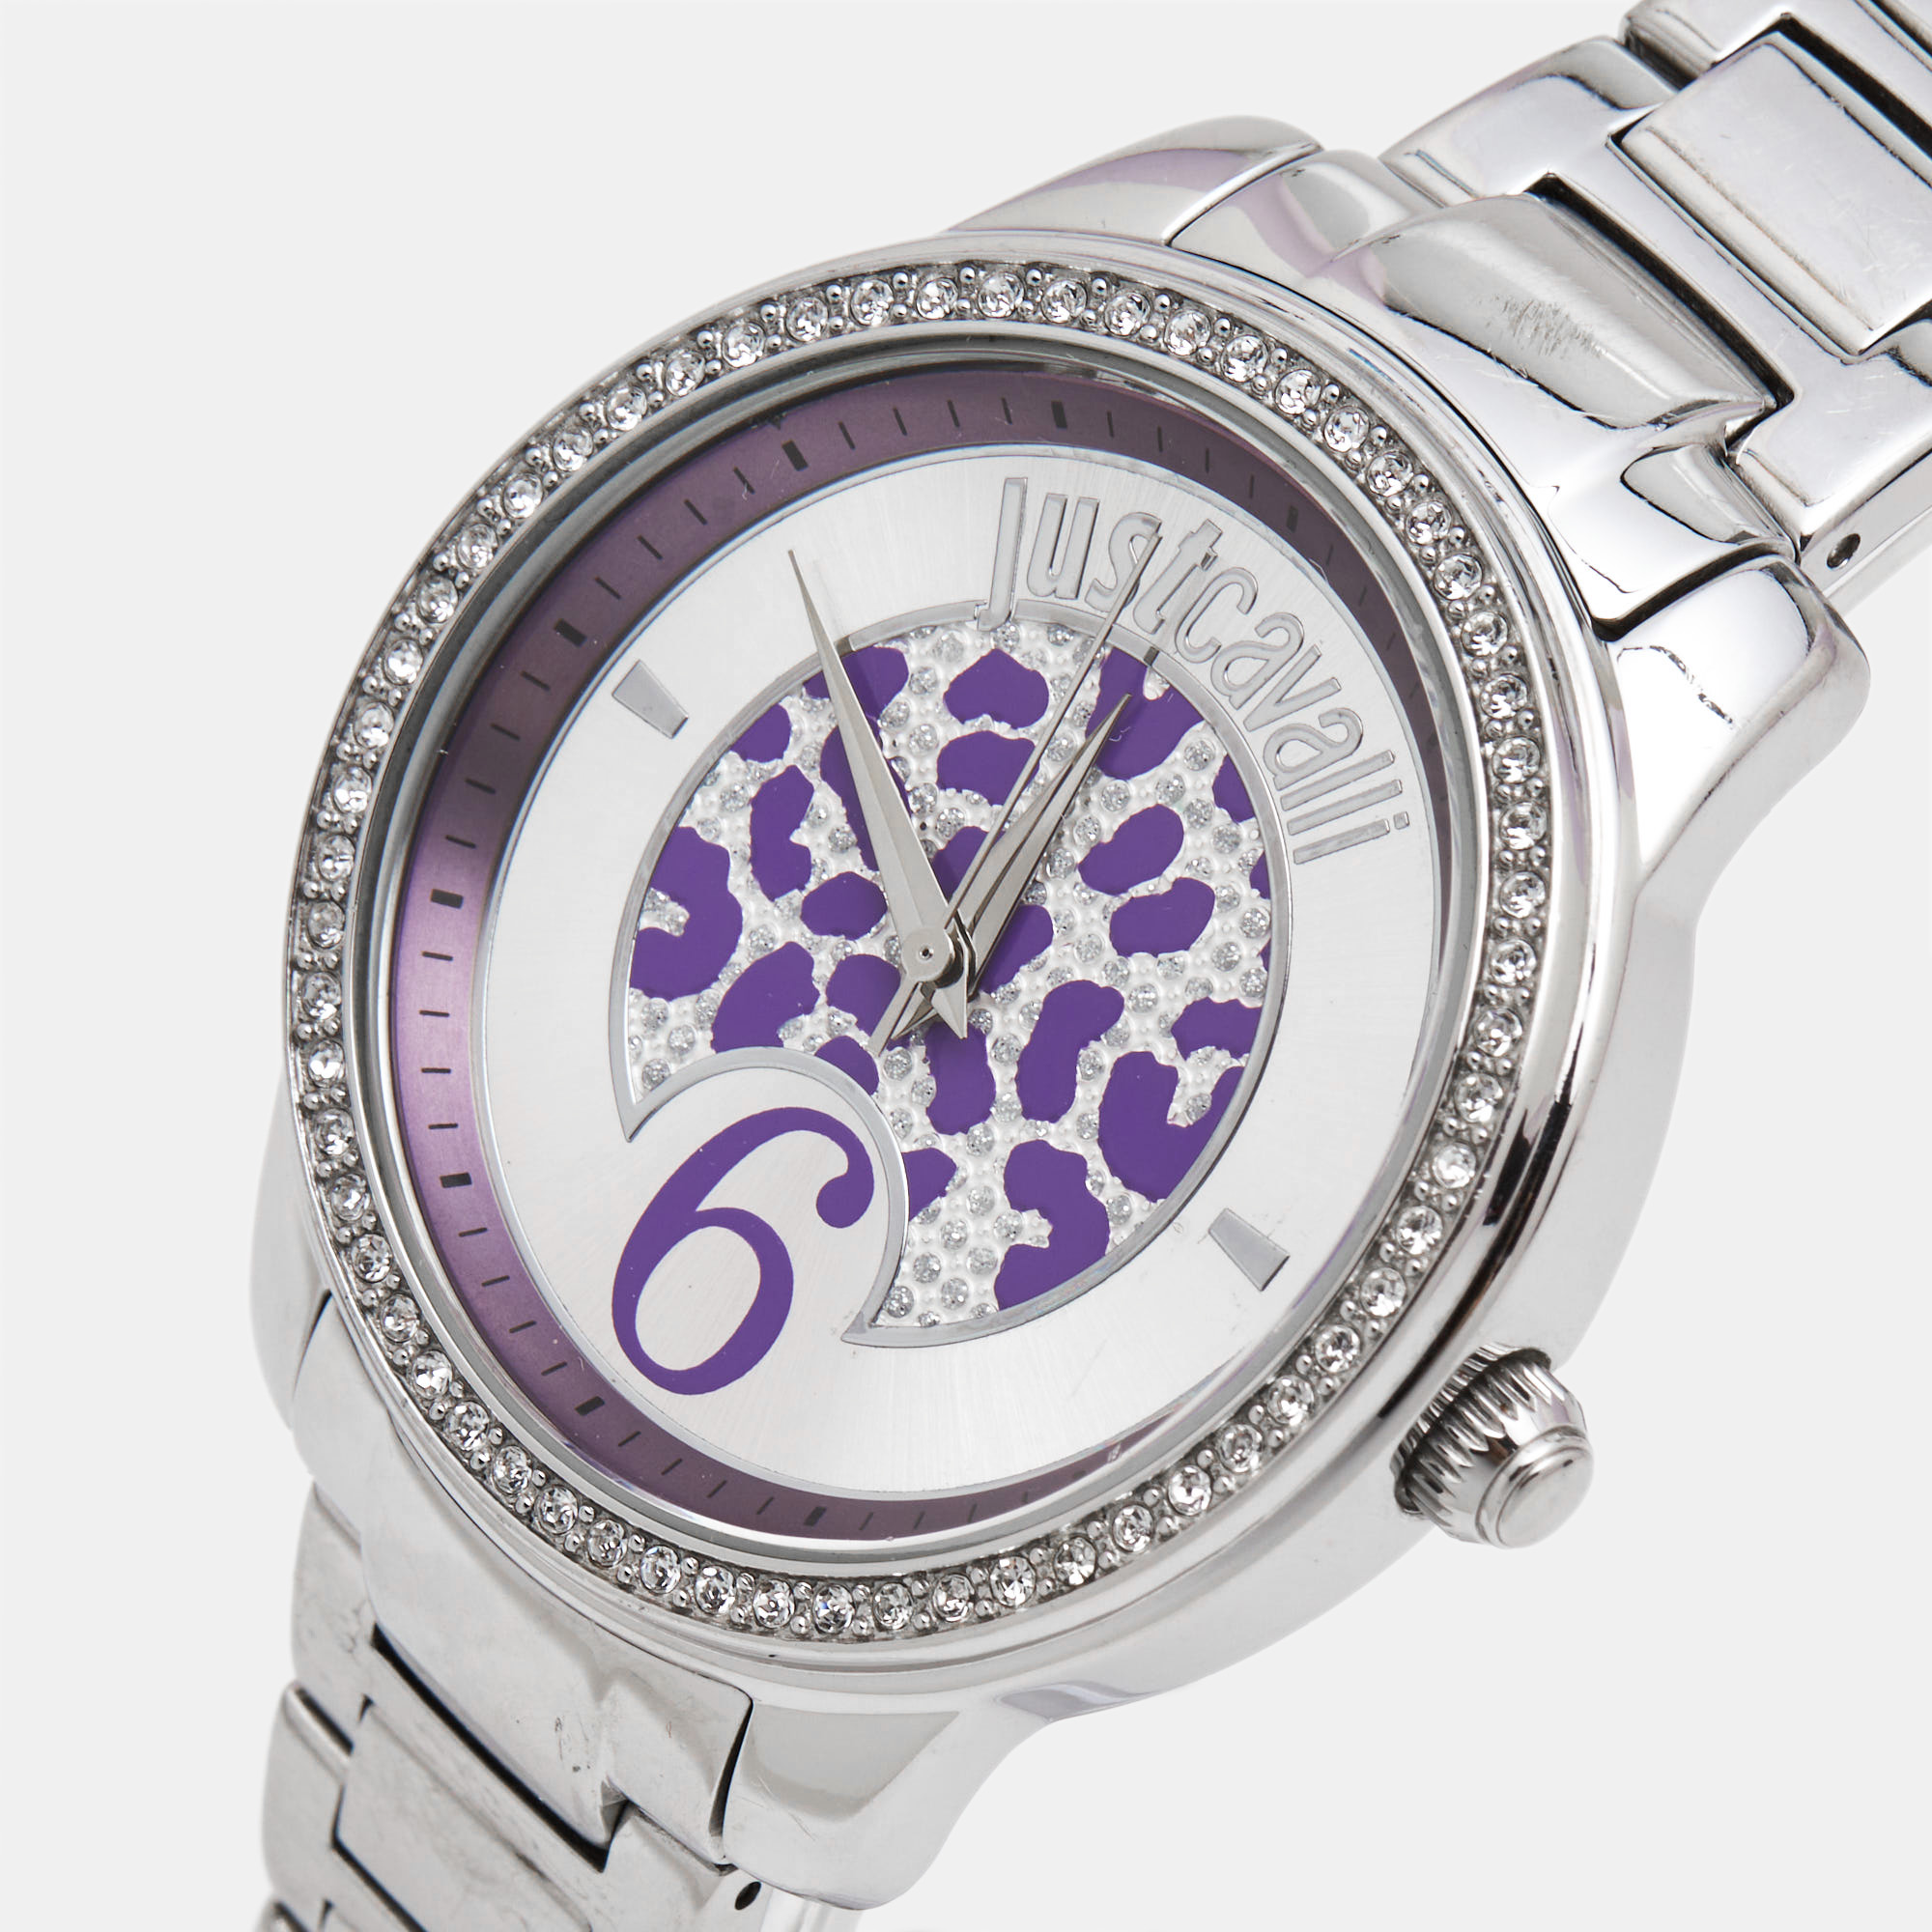 Just Cavalli Purple Silver Crystal Embellished Stainless Steel R7253196501 Women's Wristwatch 40 Mm